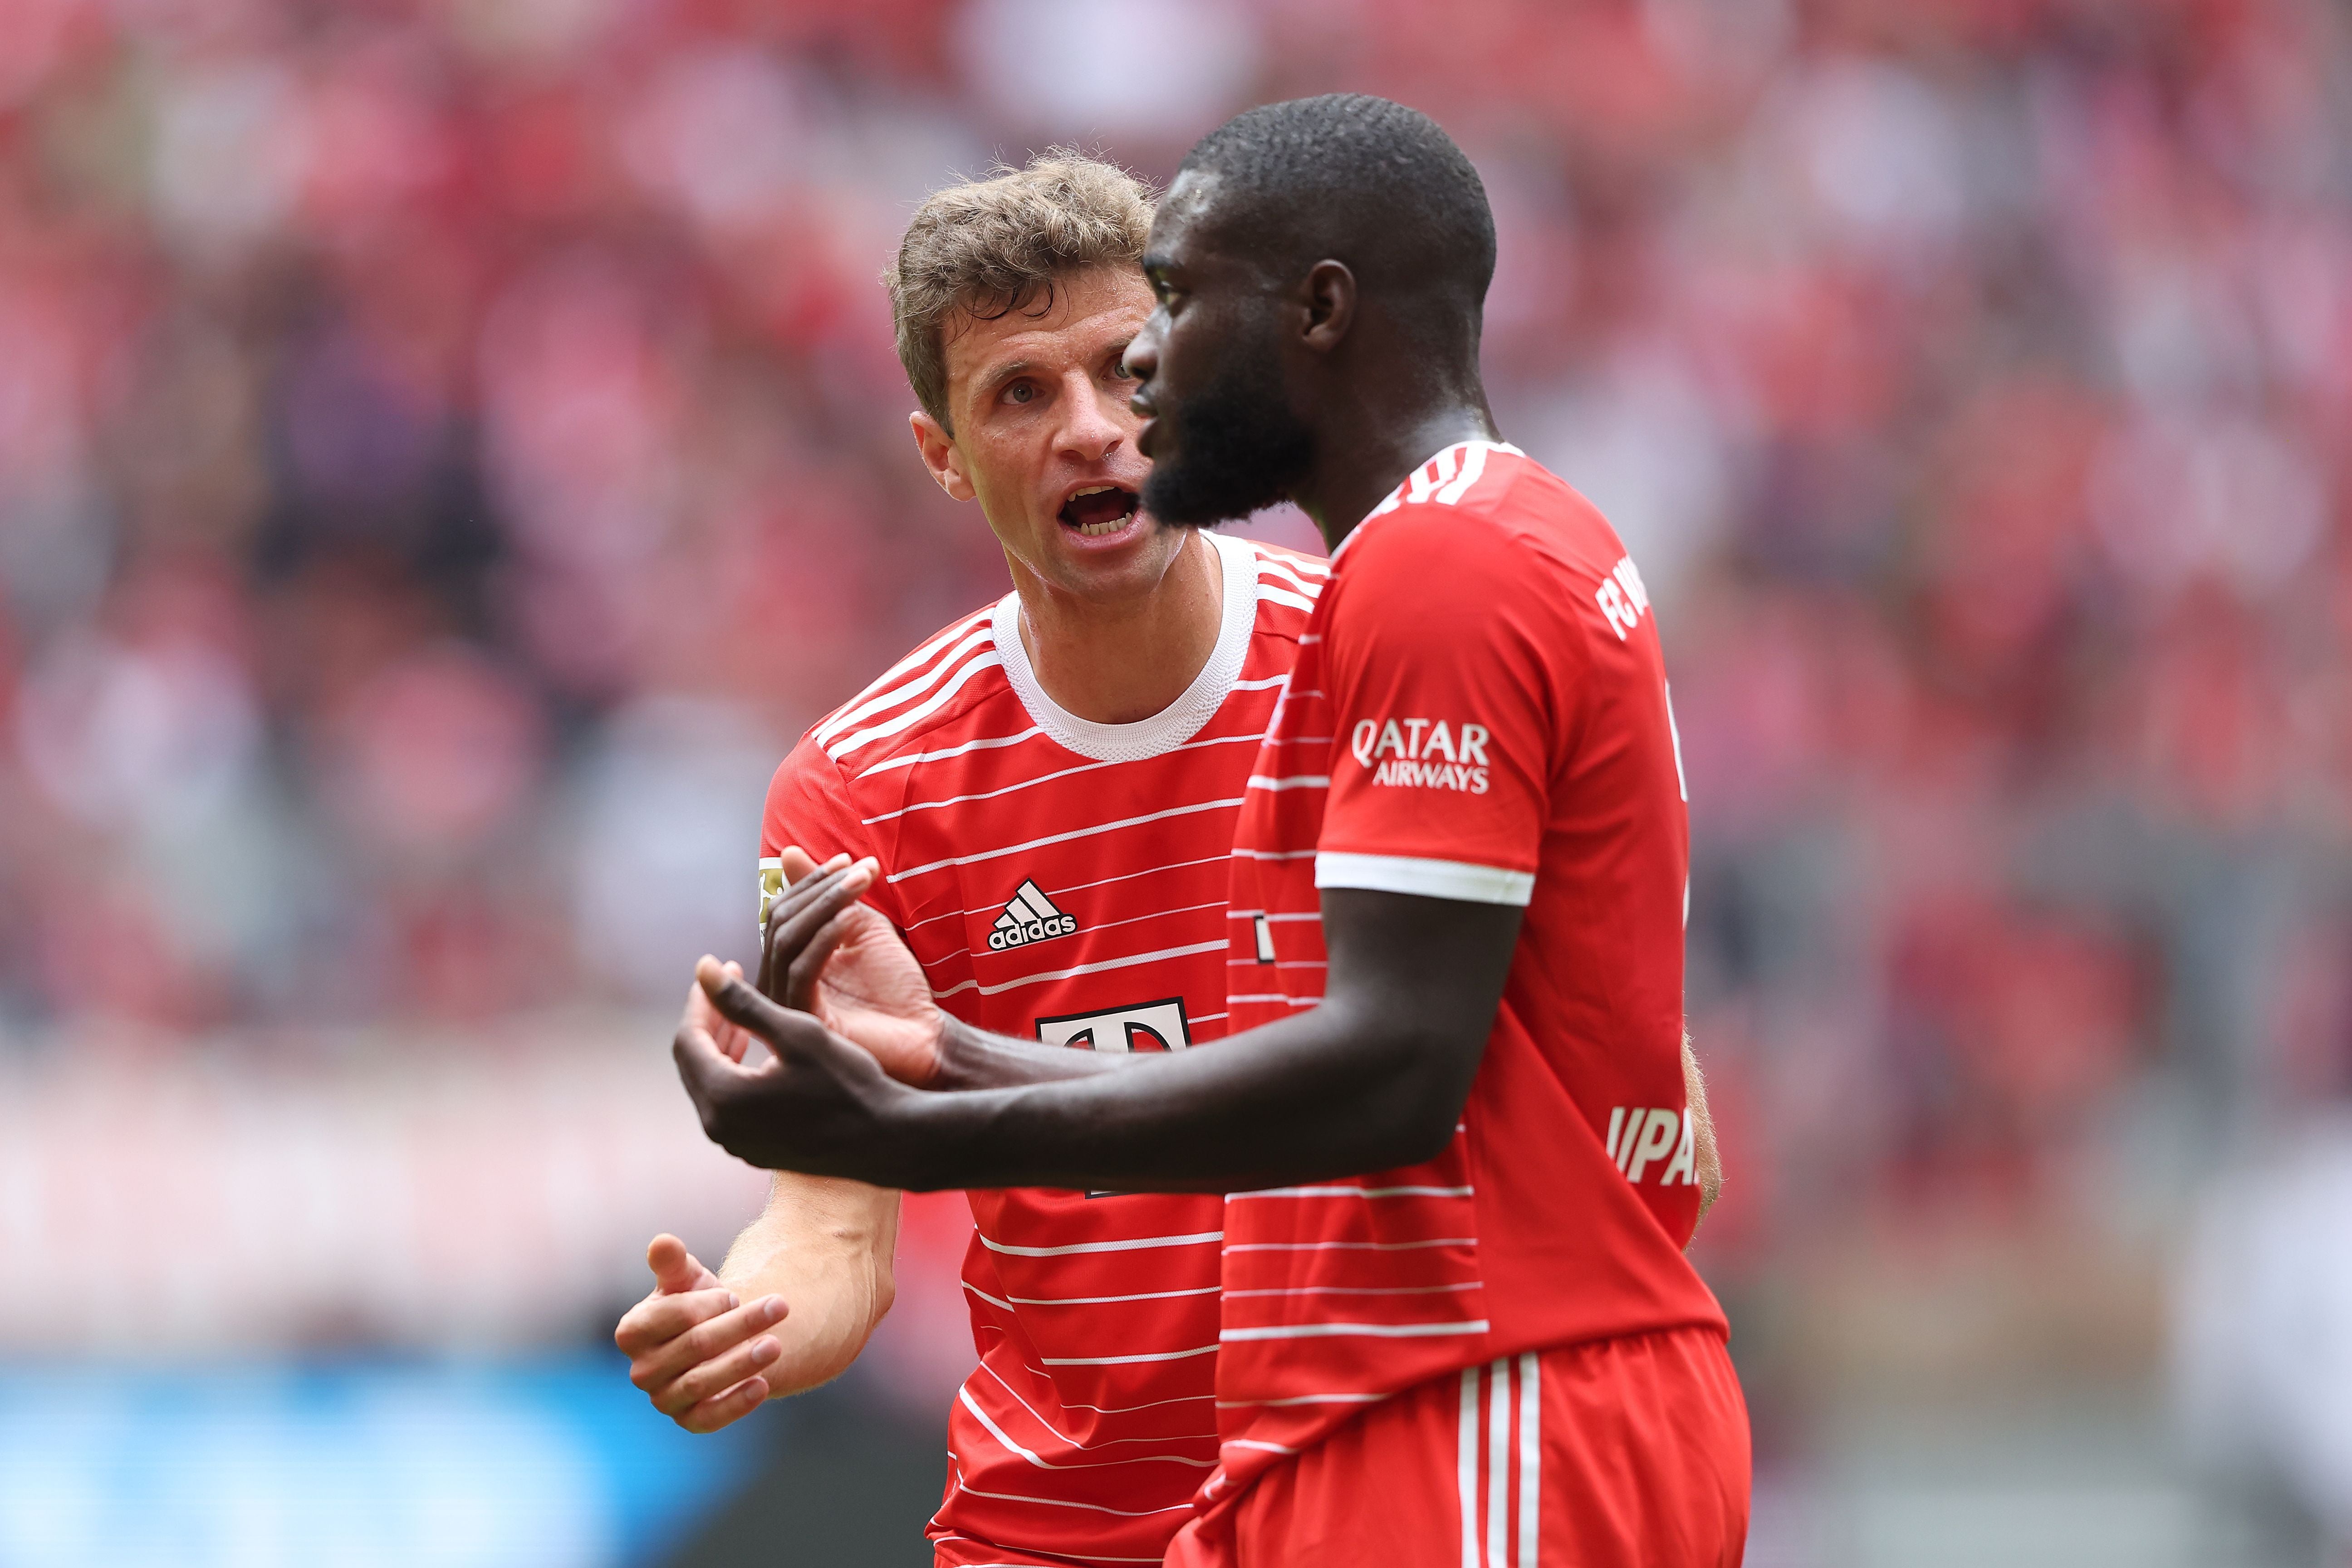 Thomas Muller and Dayot Upamecano argue on the pitch